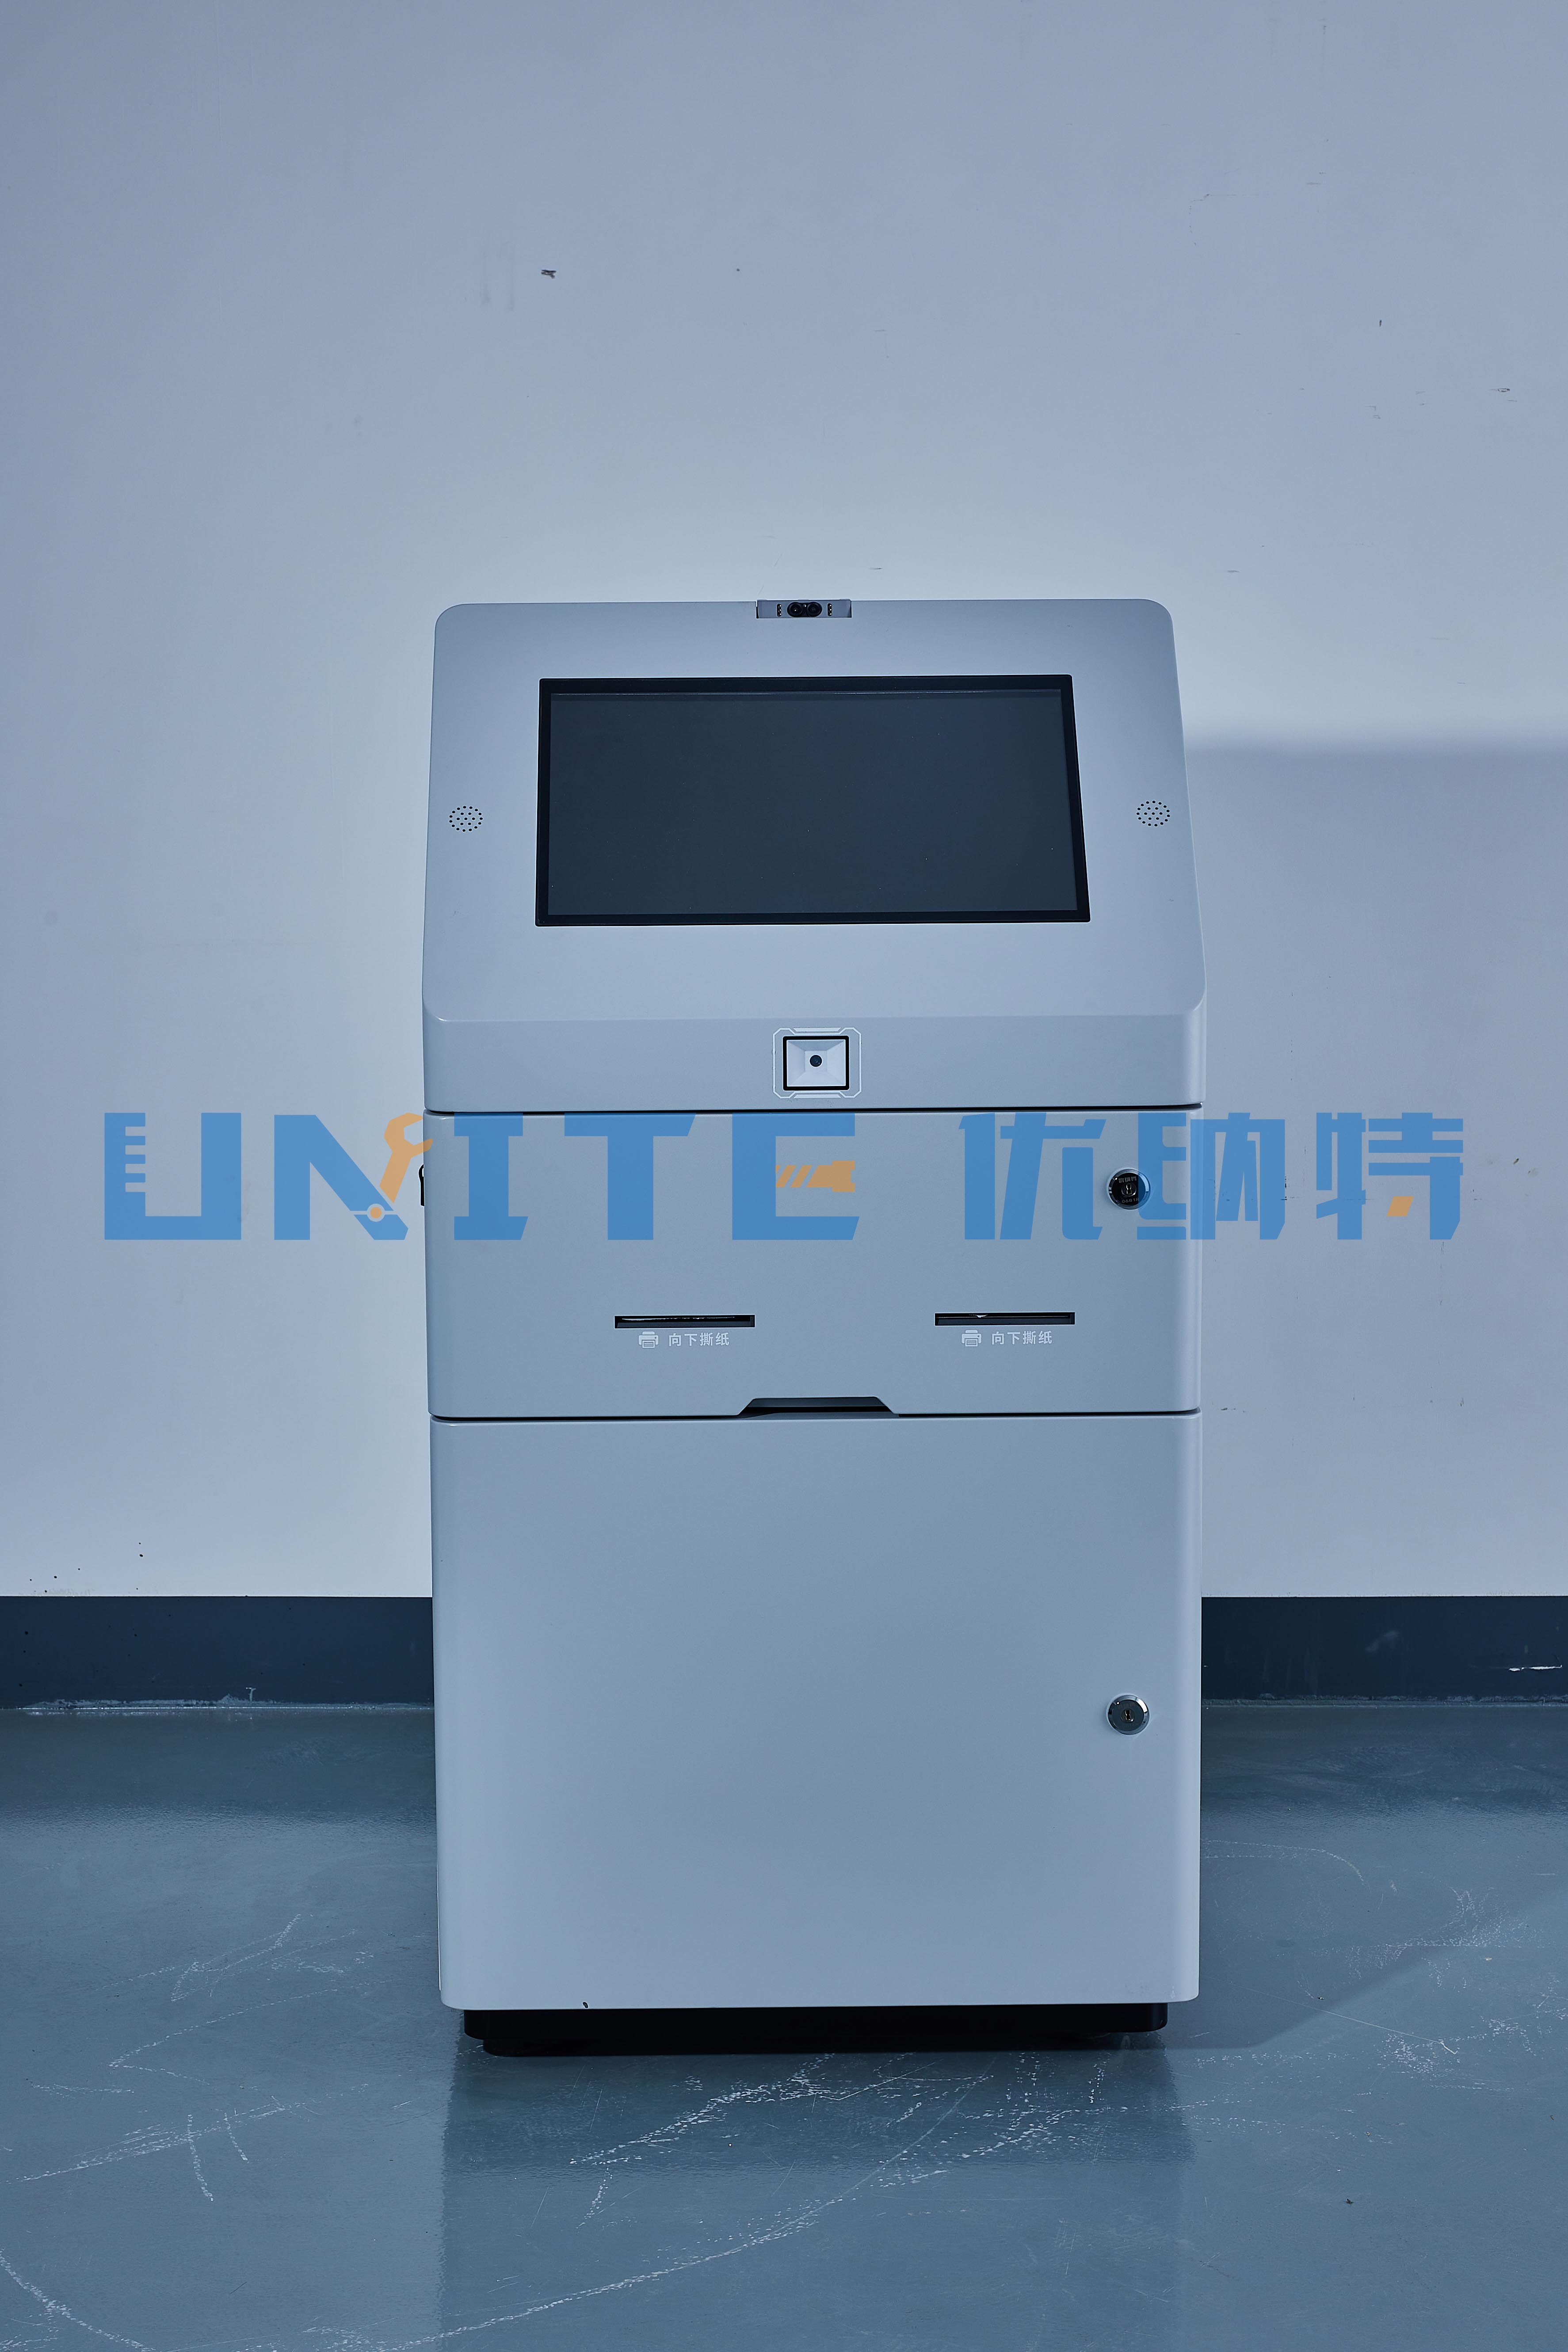 Unite Usample T-P Matrix IOT Management System Self Service Printing Terminal with Multiple Printing Modes